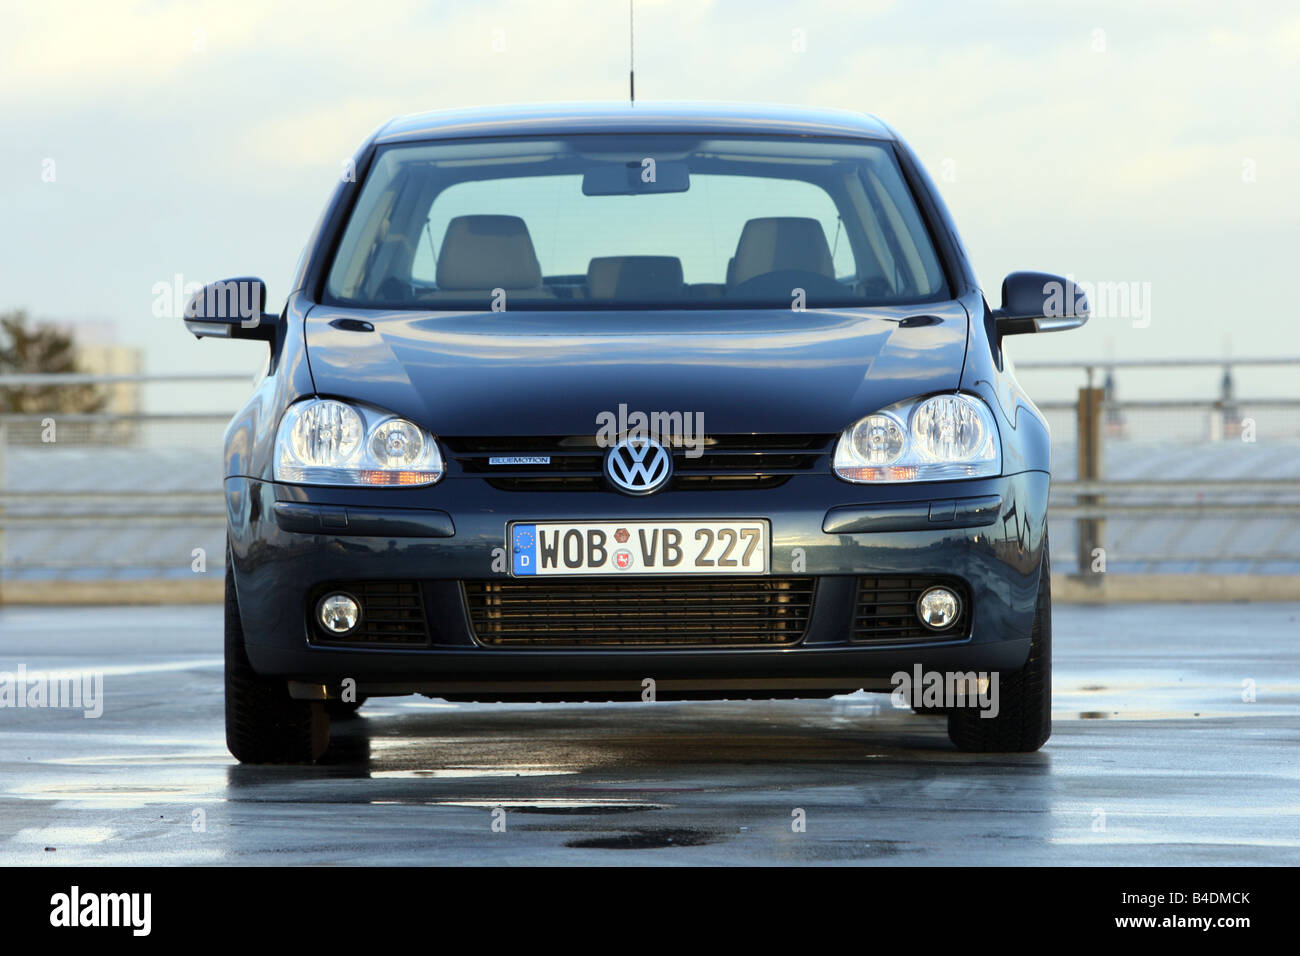 VW Volkswagen Golf Blue Motion, model year 2008-, dark blue, standing, upholding, frontal view, City Stock Photo